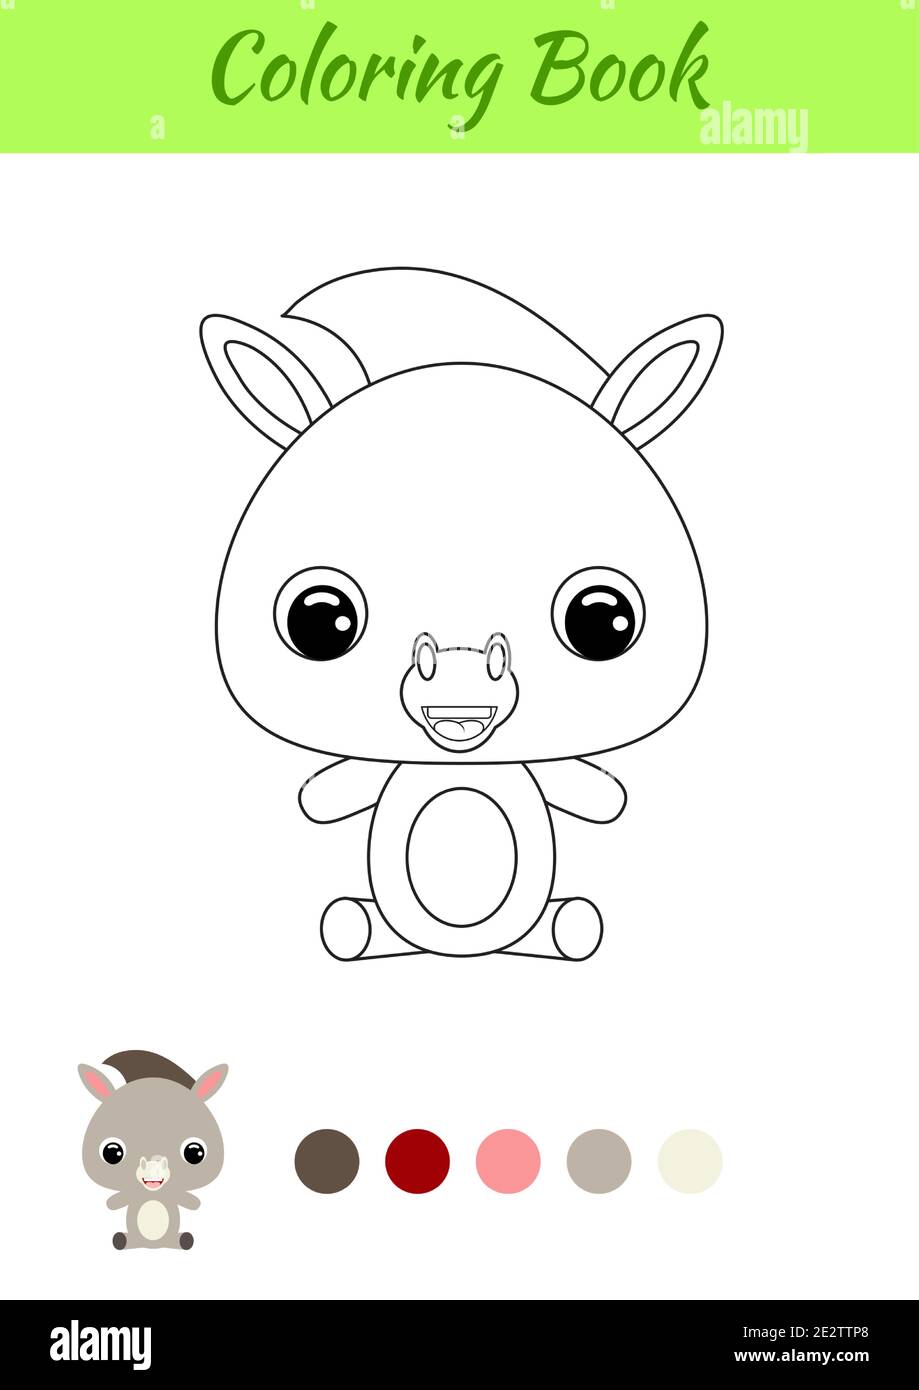 Download Coloring Book Little Baby Donkey Sitting Coloring Page For Kids Educational Activity For Preschool Years Kids And Toddlers With Cute Animal Stock Vector Image Art Alamy